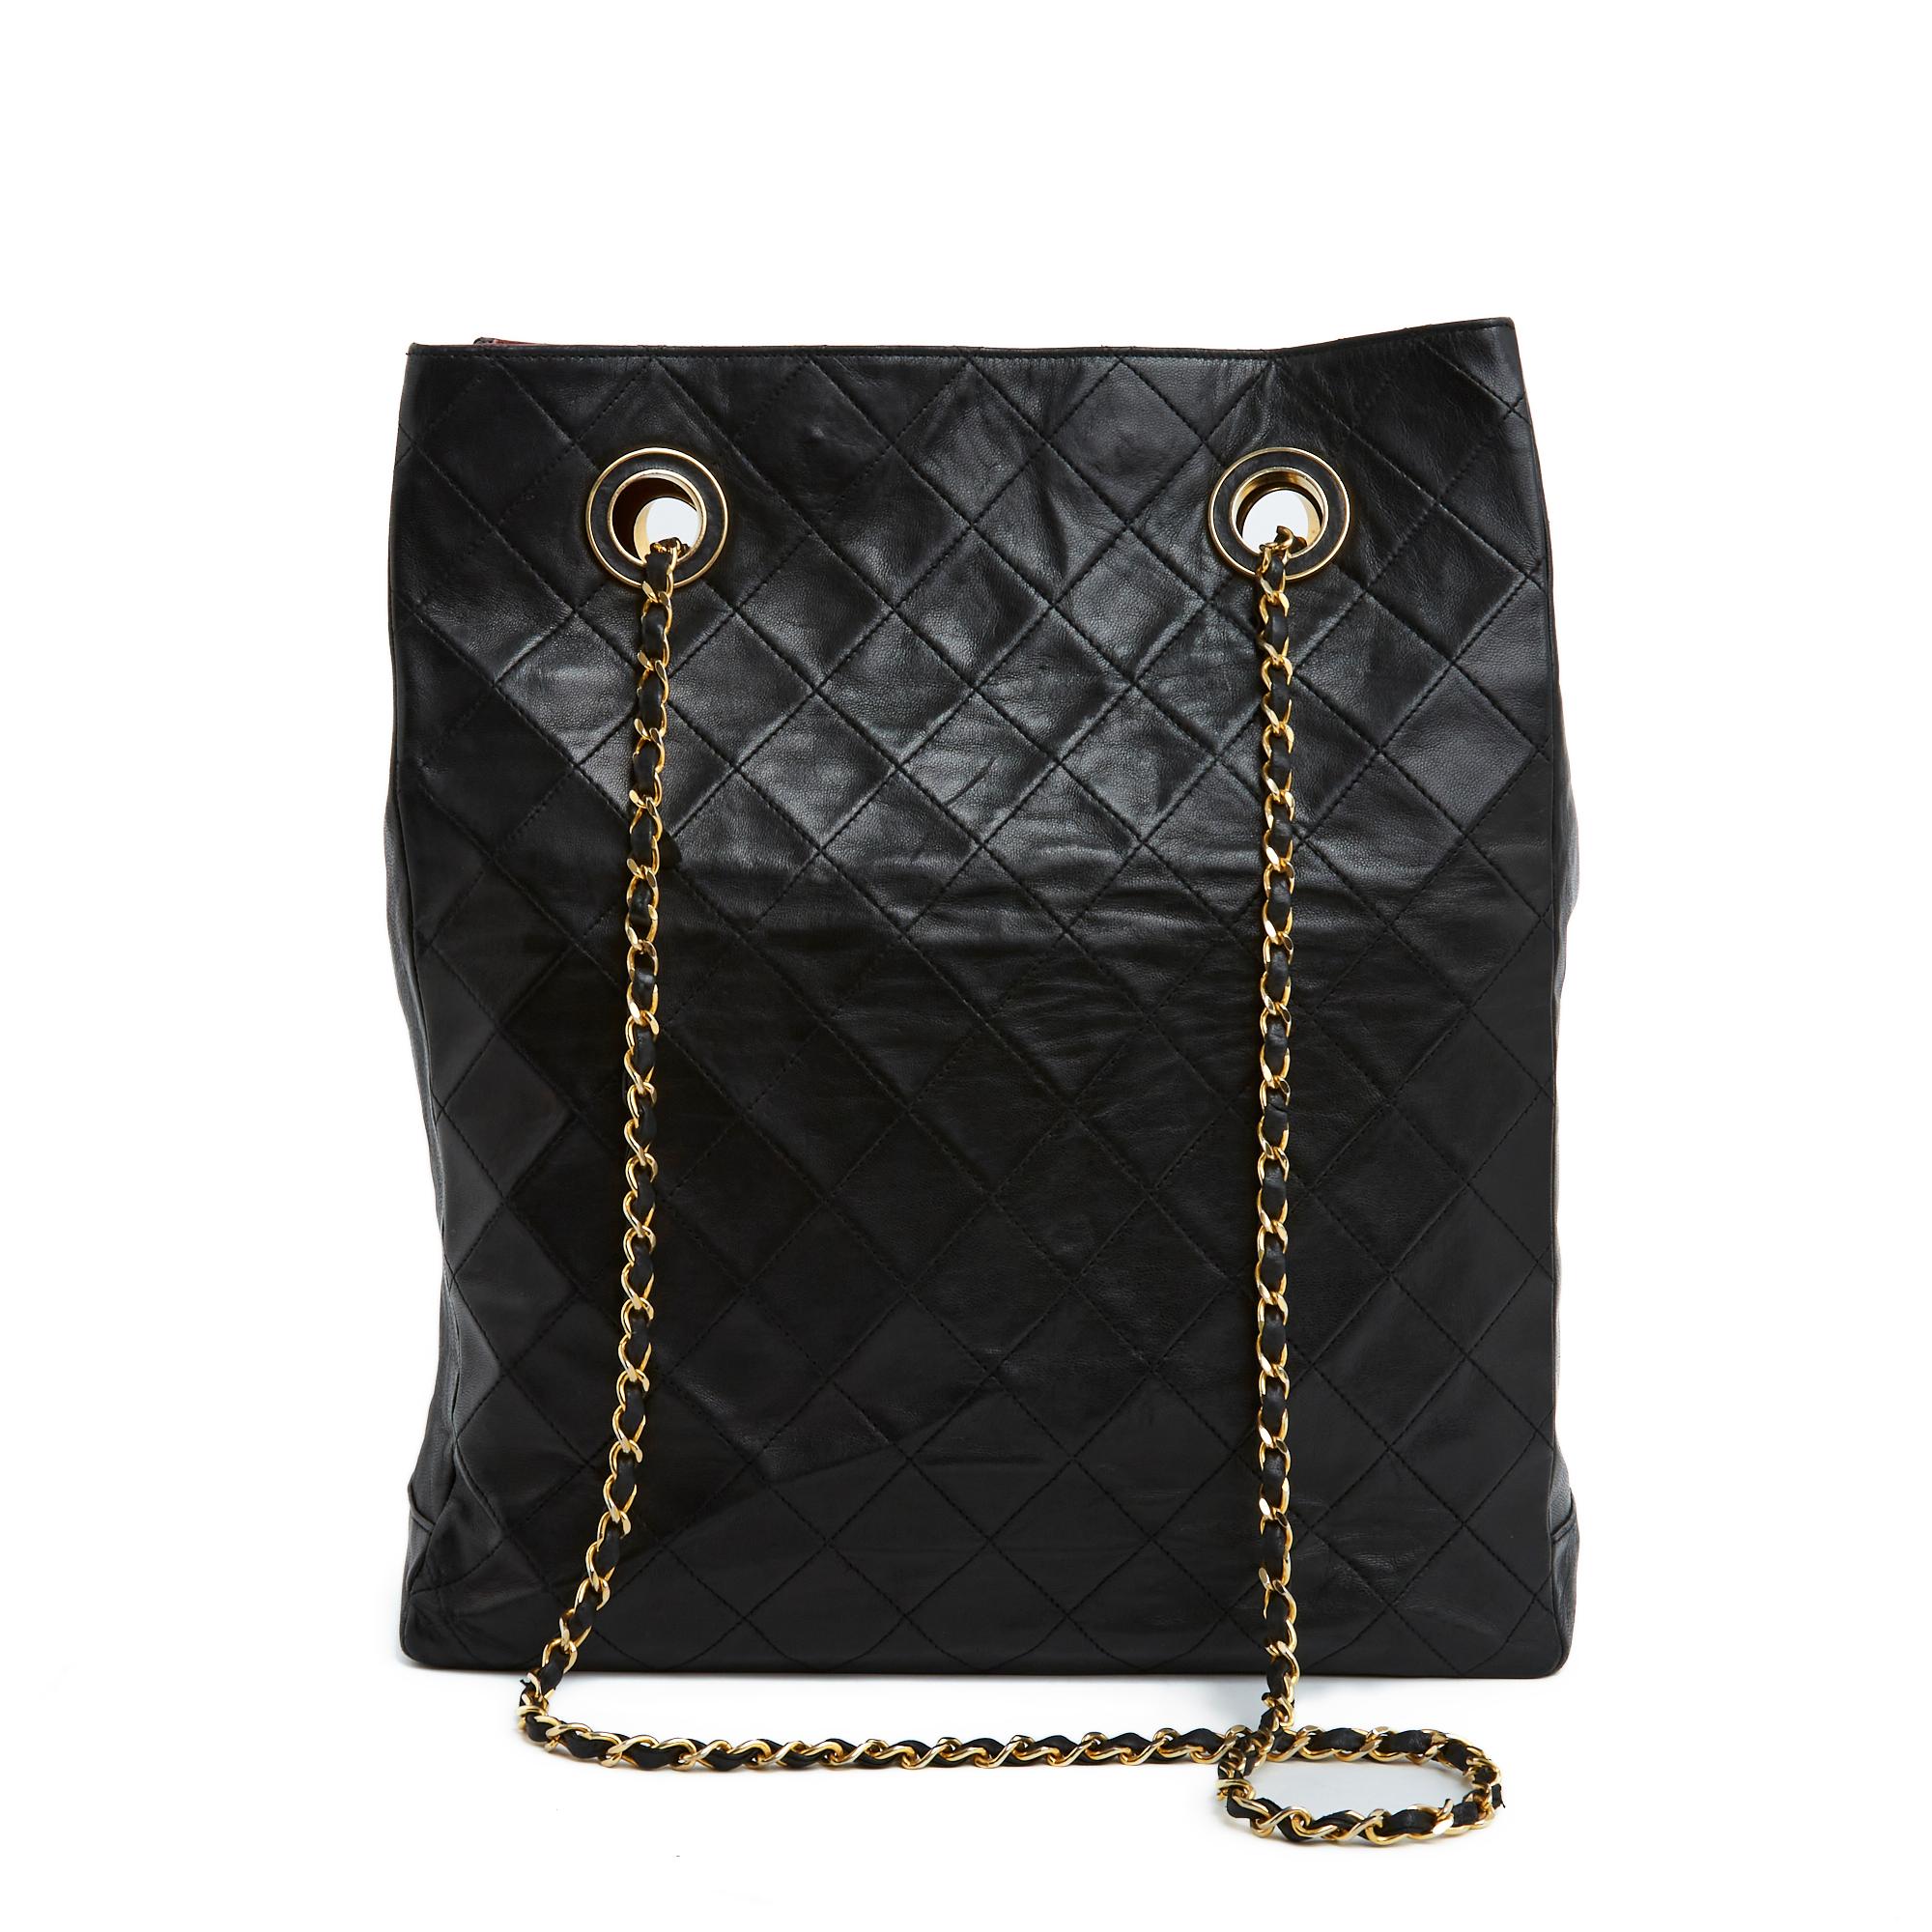 1985 Chanel Haute Couture Timeless Classique Black Tote In Fair Condition For Sale In PARIS, FR